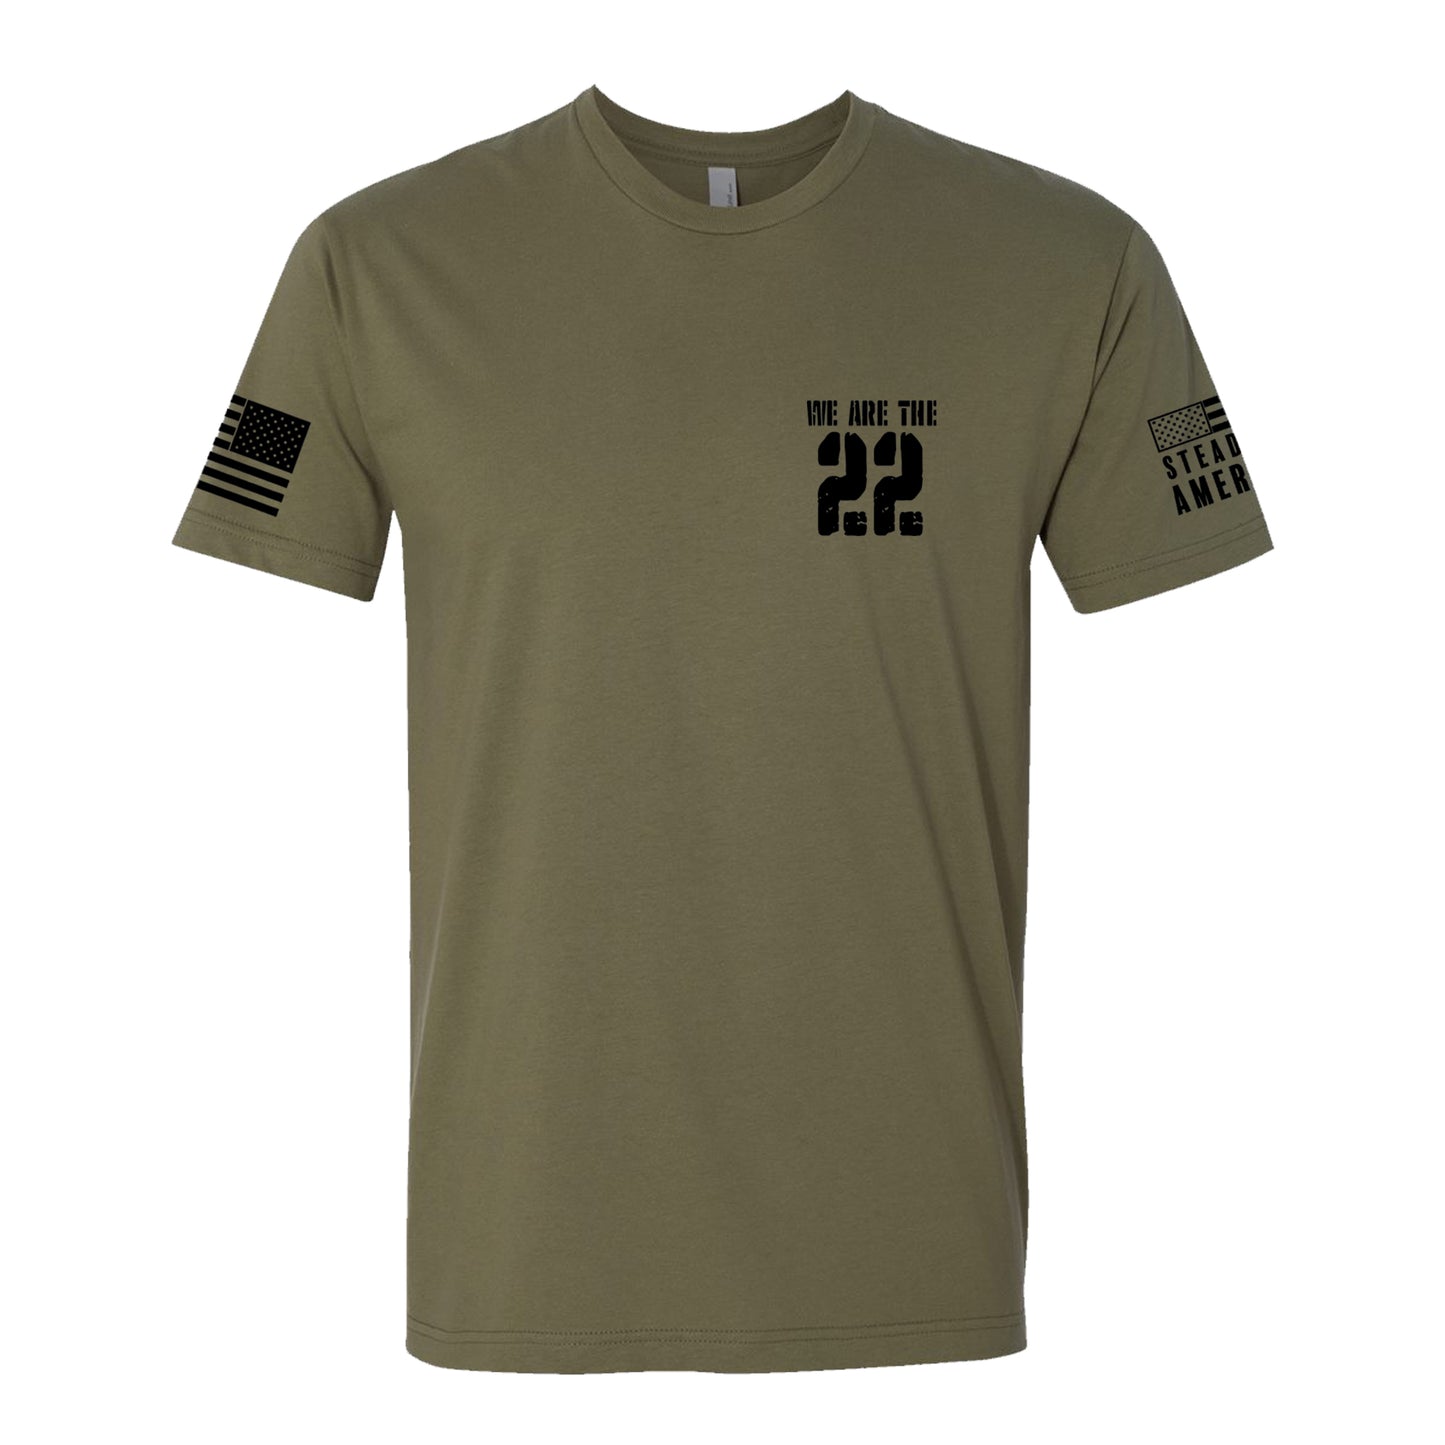 We Are The 22, Short Sleeve, O.D. Green